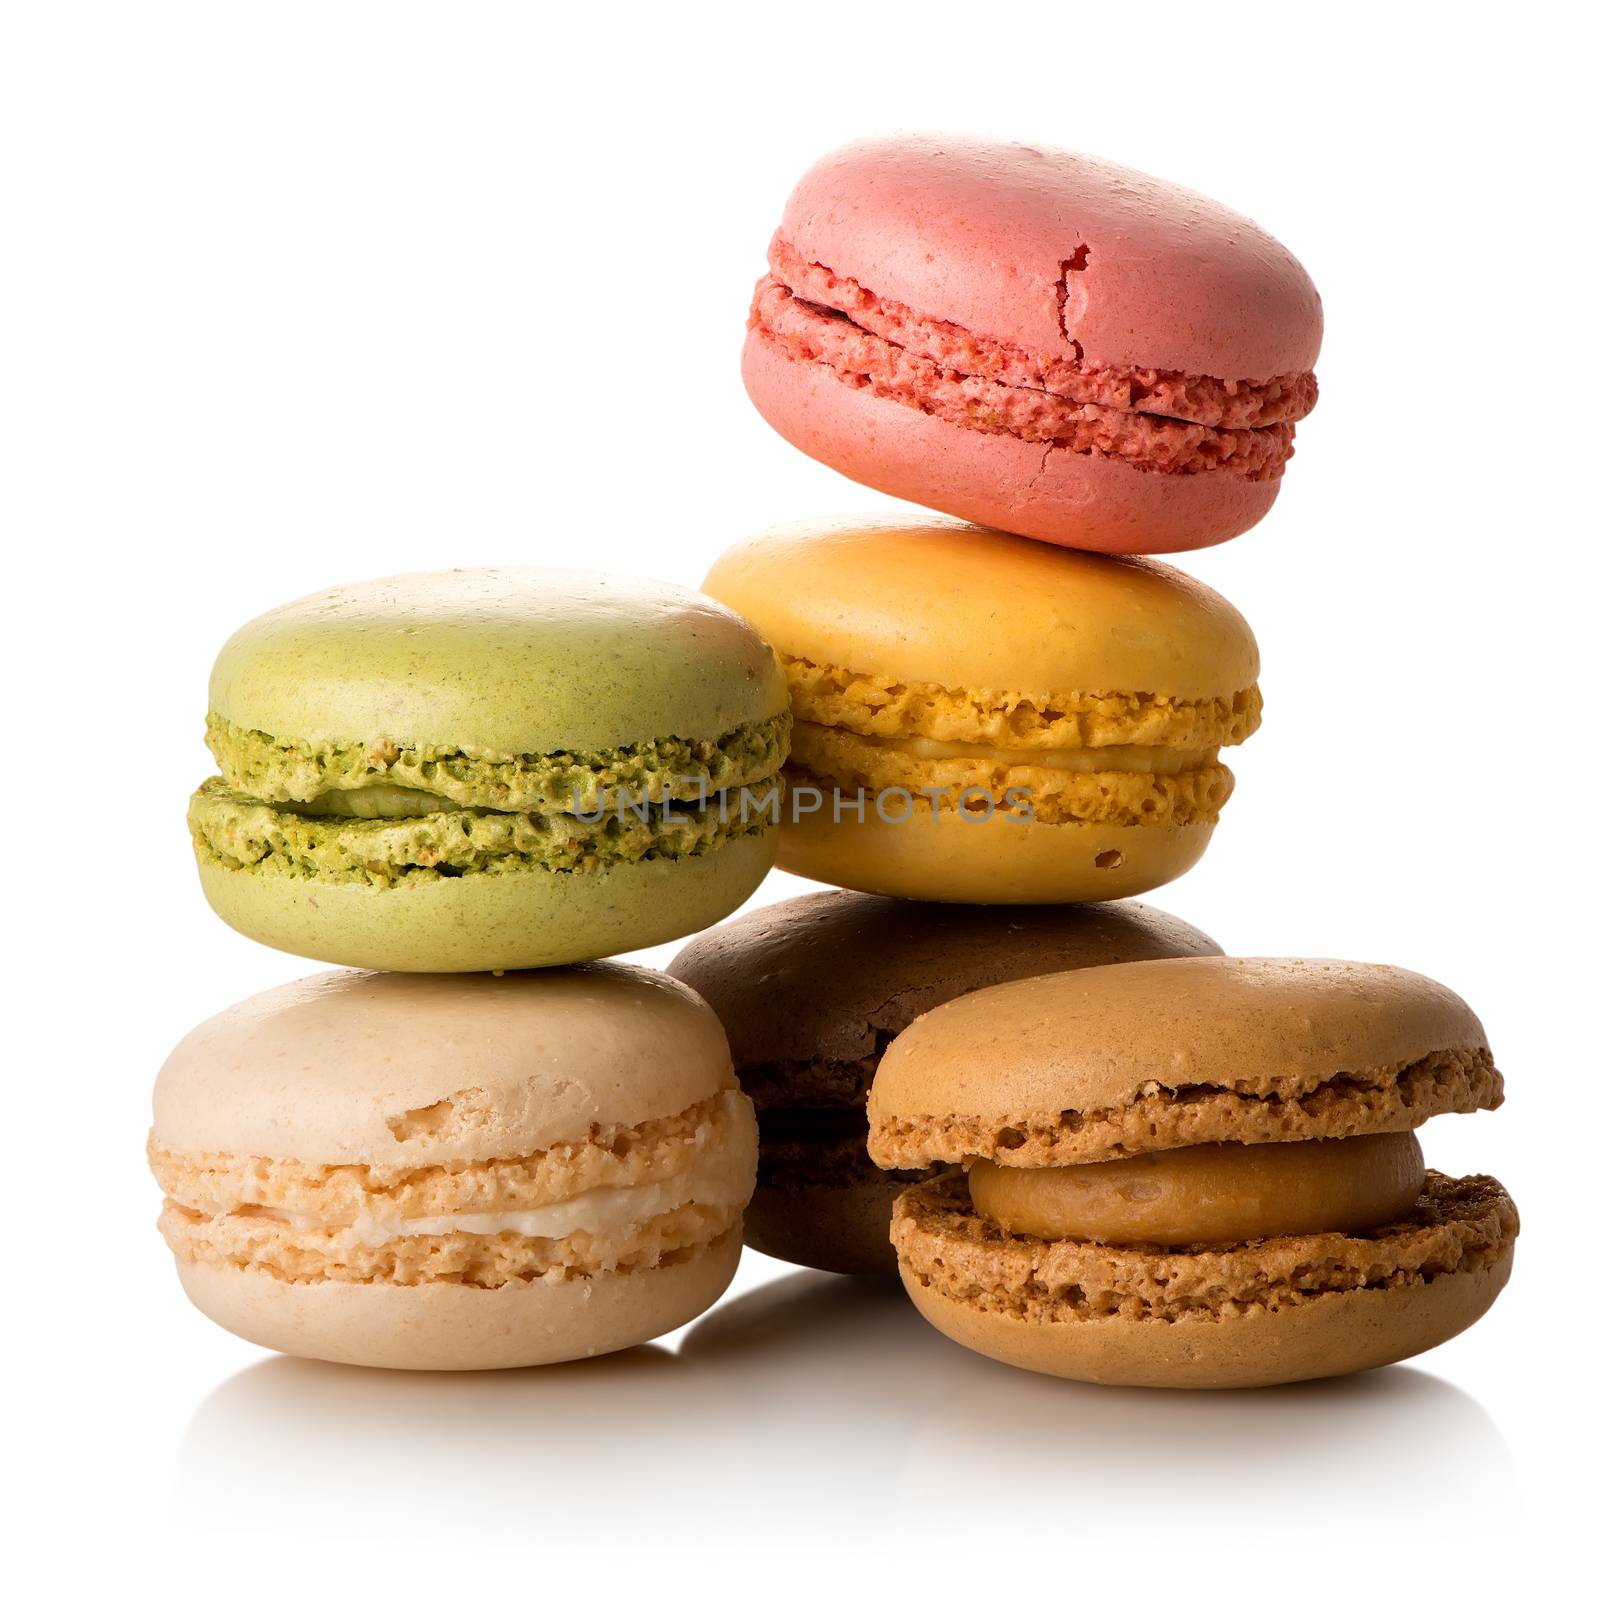 Colorful french macarons by Givaga